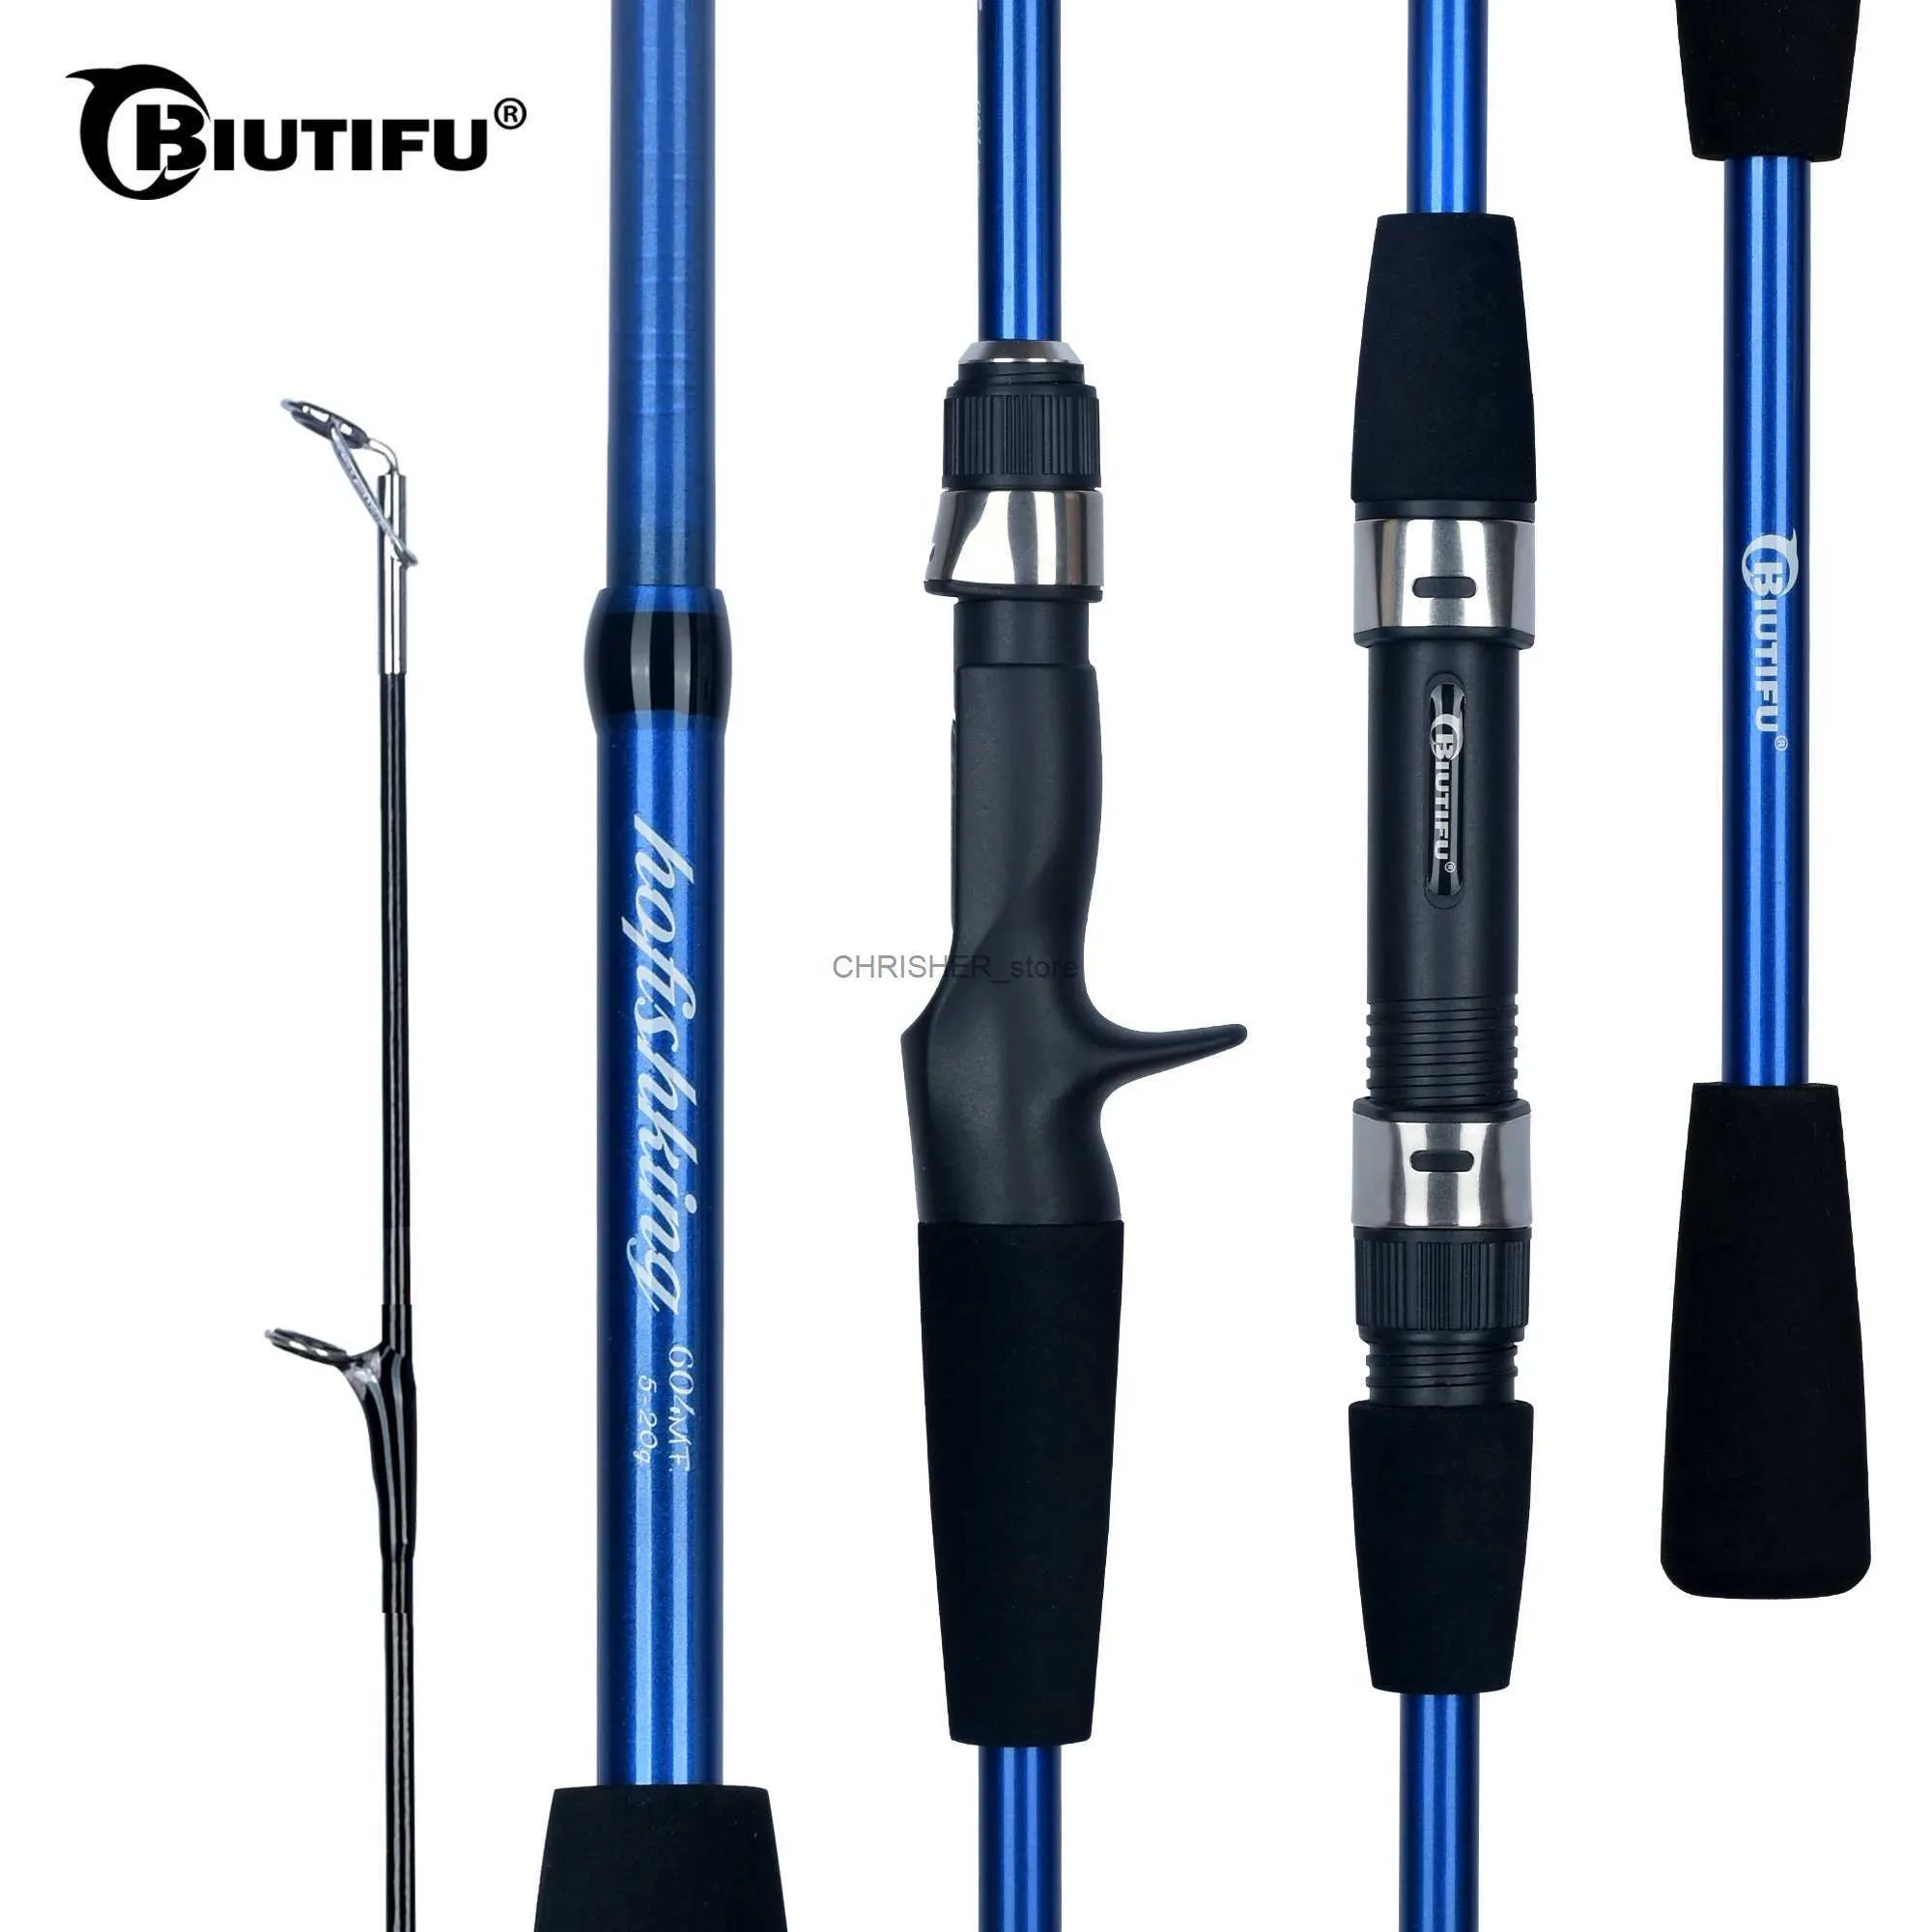 Boat Fishing Rods BIUTIFU Baitcasting Spinning Mini Fishing Rod 4/5 Section  1.8/2.1mTravel Carbon Casting Weight 5 20g Fast Ultralight Lure PoleL231223  From Chrisher_store, $17.34